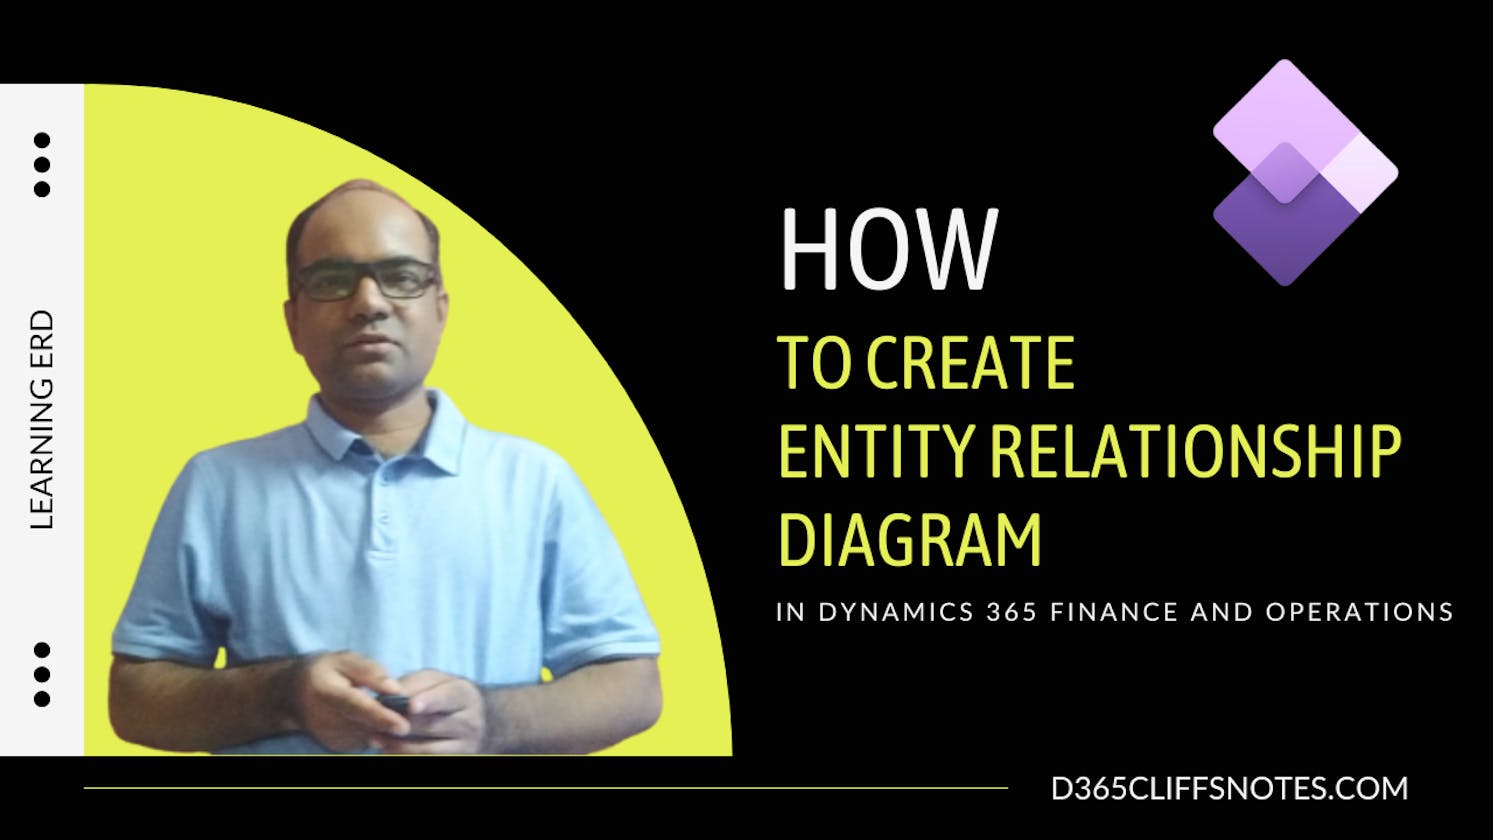 What Must Be Done To Create An Entity Relationship Diagram in Dynamics 365 Finance & Operations